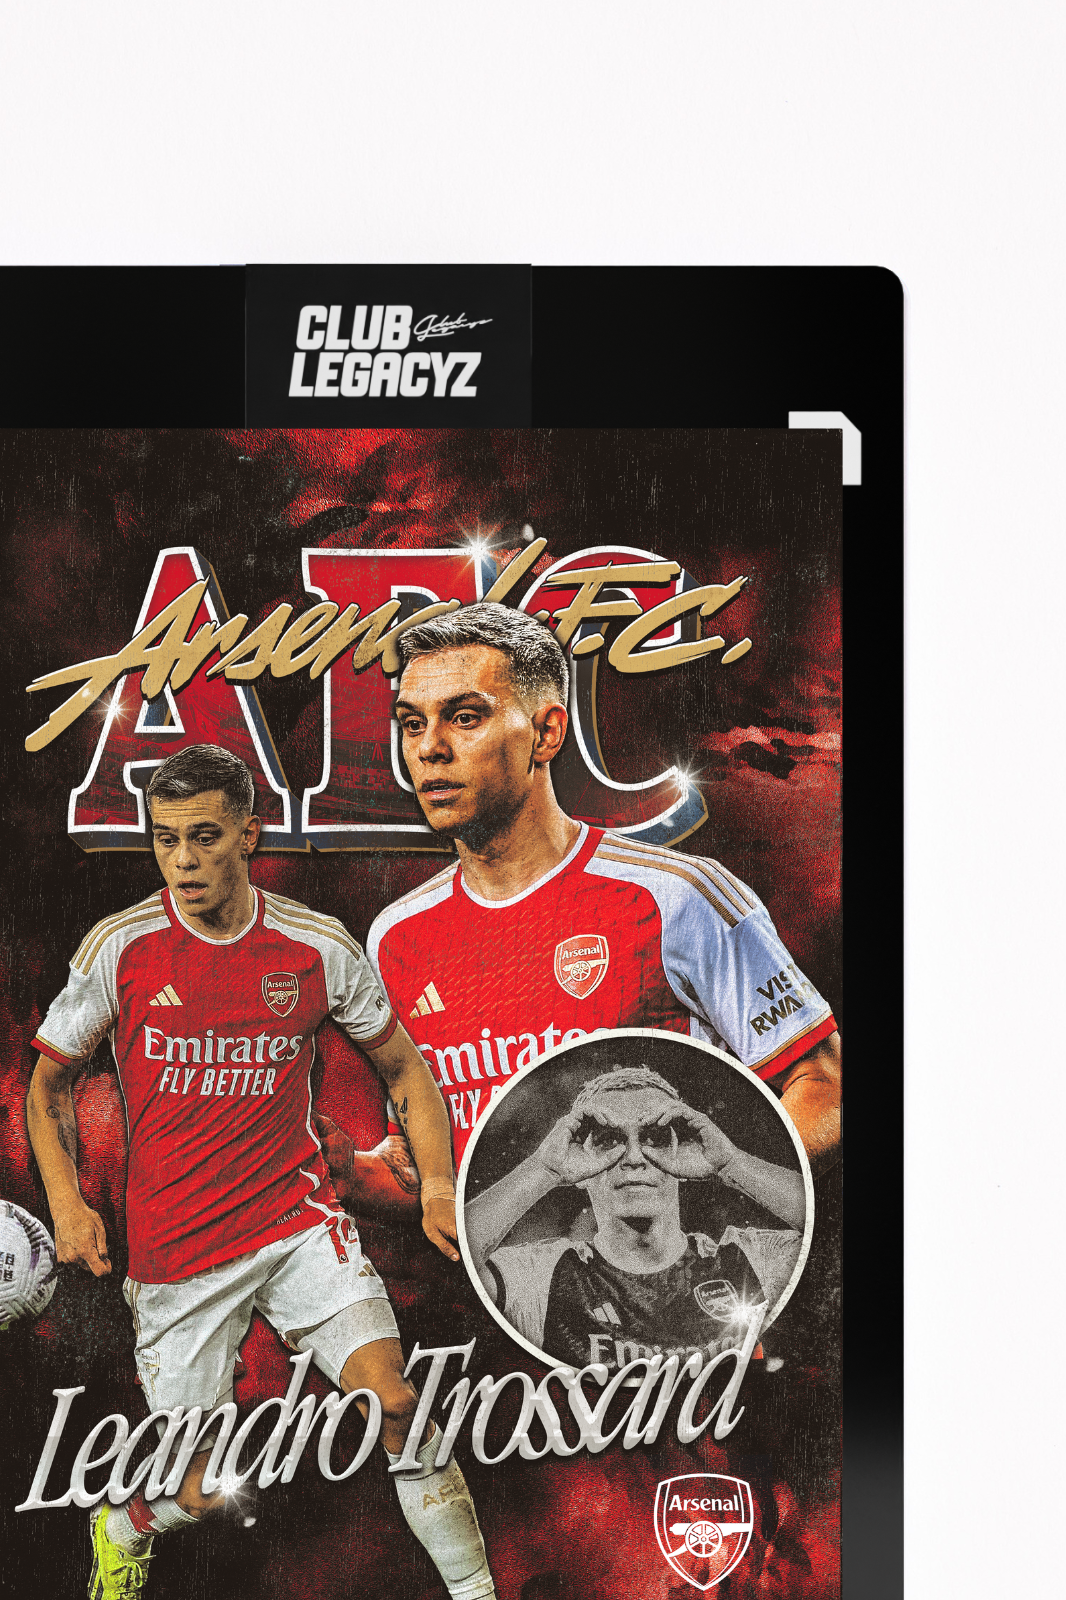 Arsenal FC - Leandro Trossard Bootleg Icon limited to 100